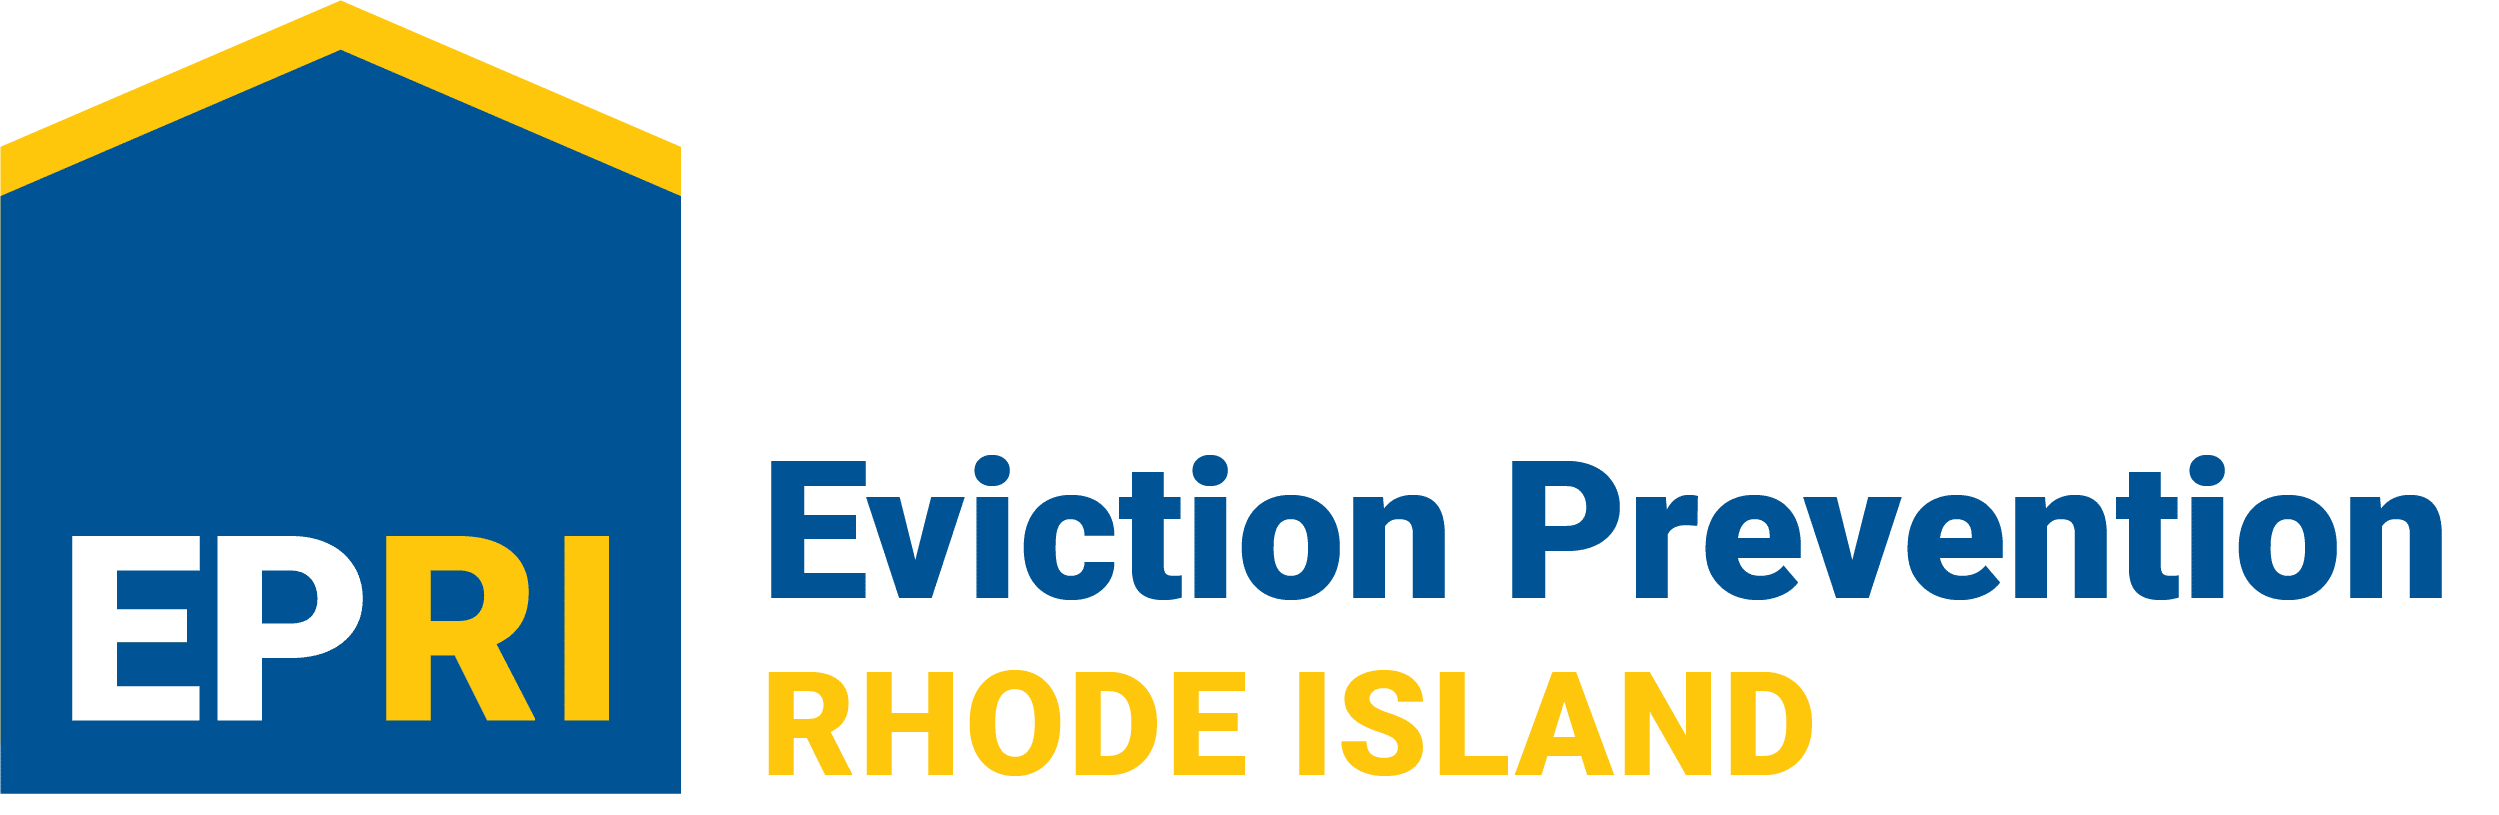 Eviction Prevention Rhode Island